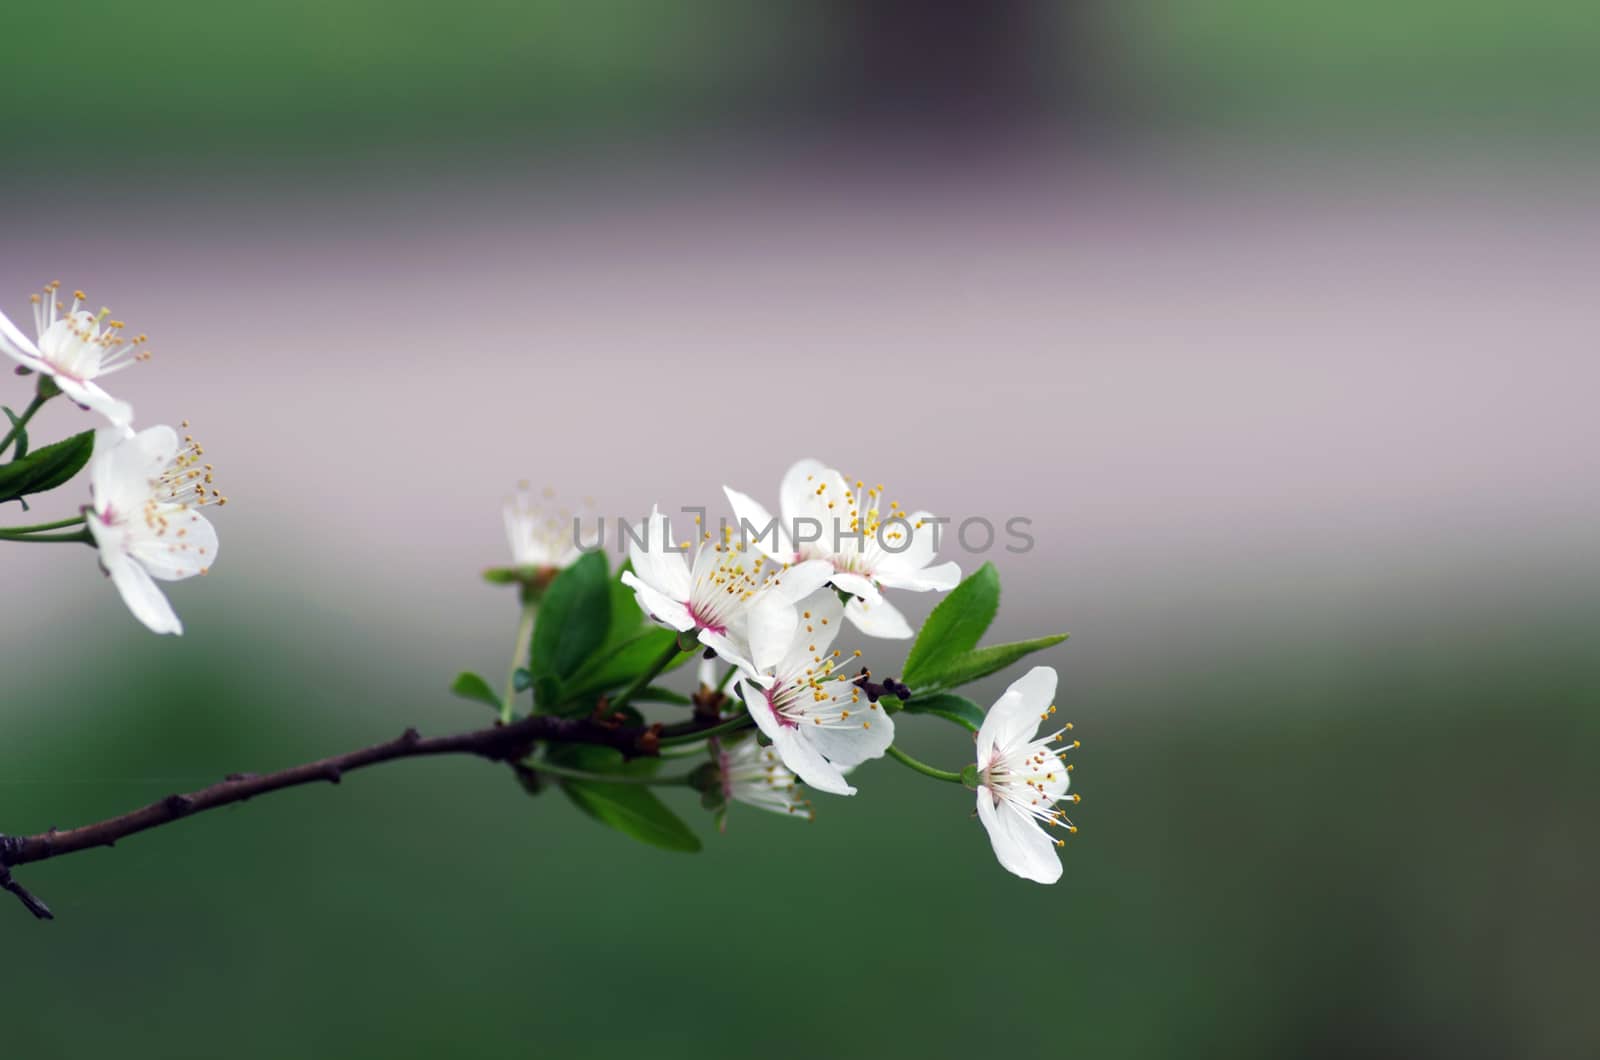 Spring blossom background - abstract floral border of green leaves and white flowers